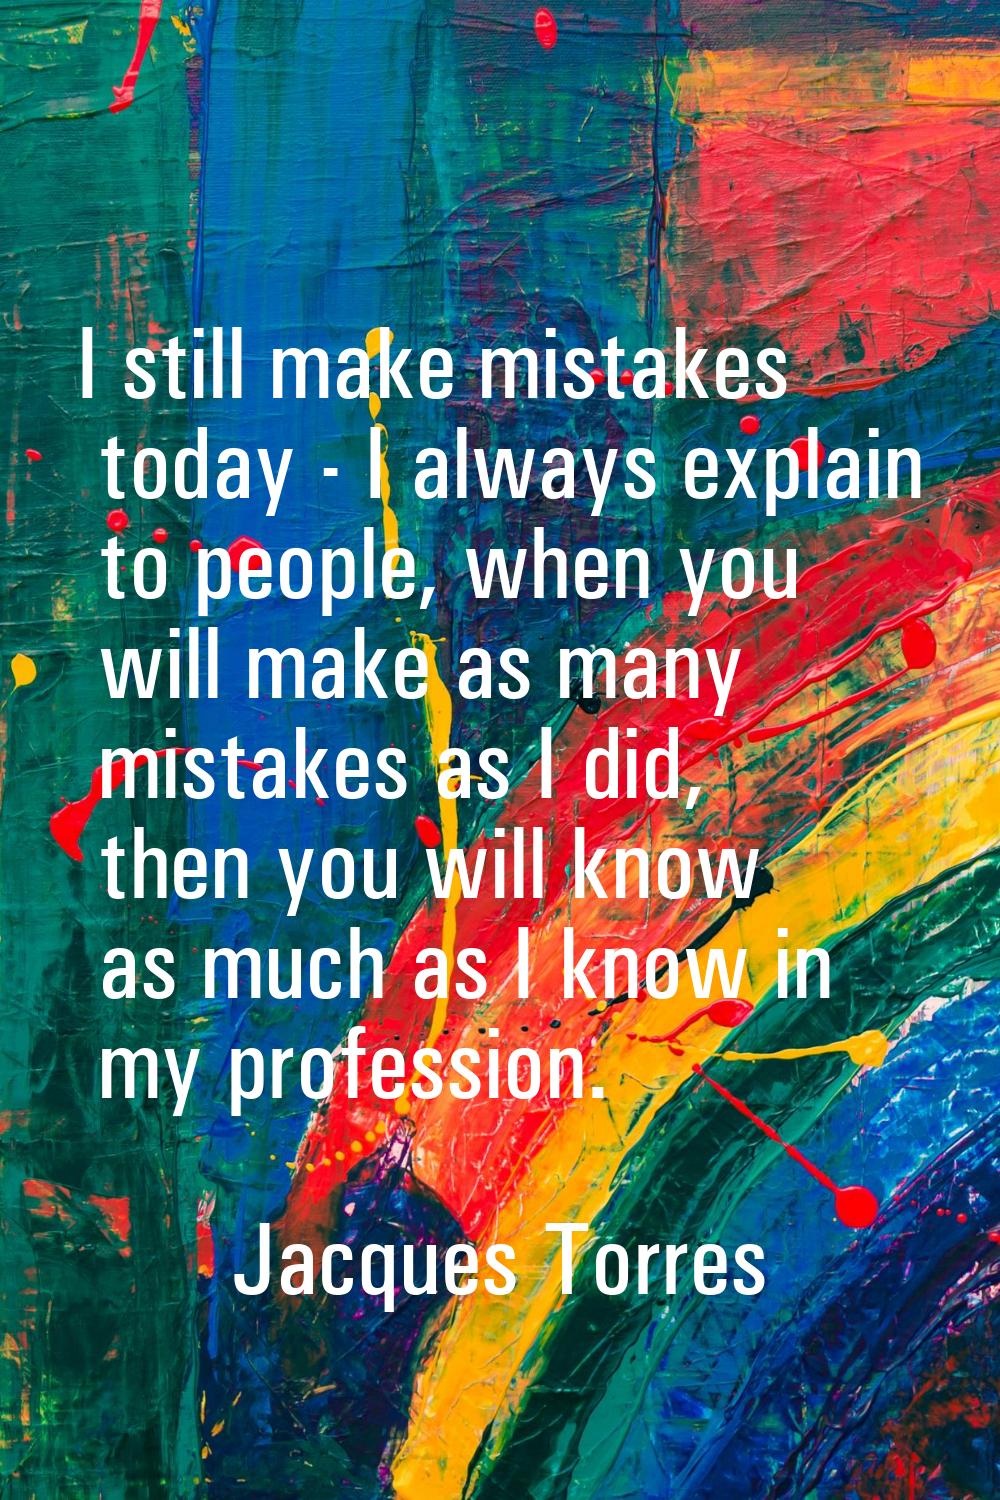 I still make mistakes today - I always explain to people, when you will make as many mistakes as I 